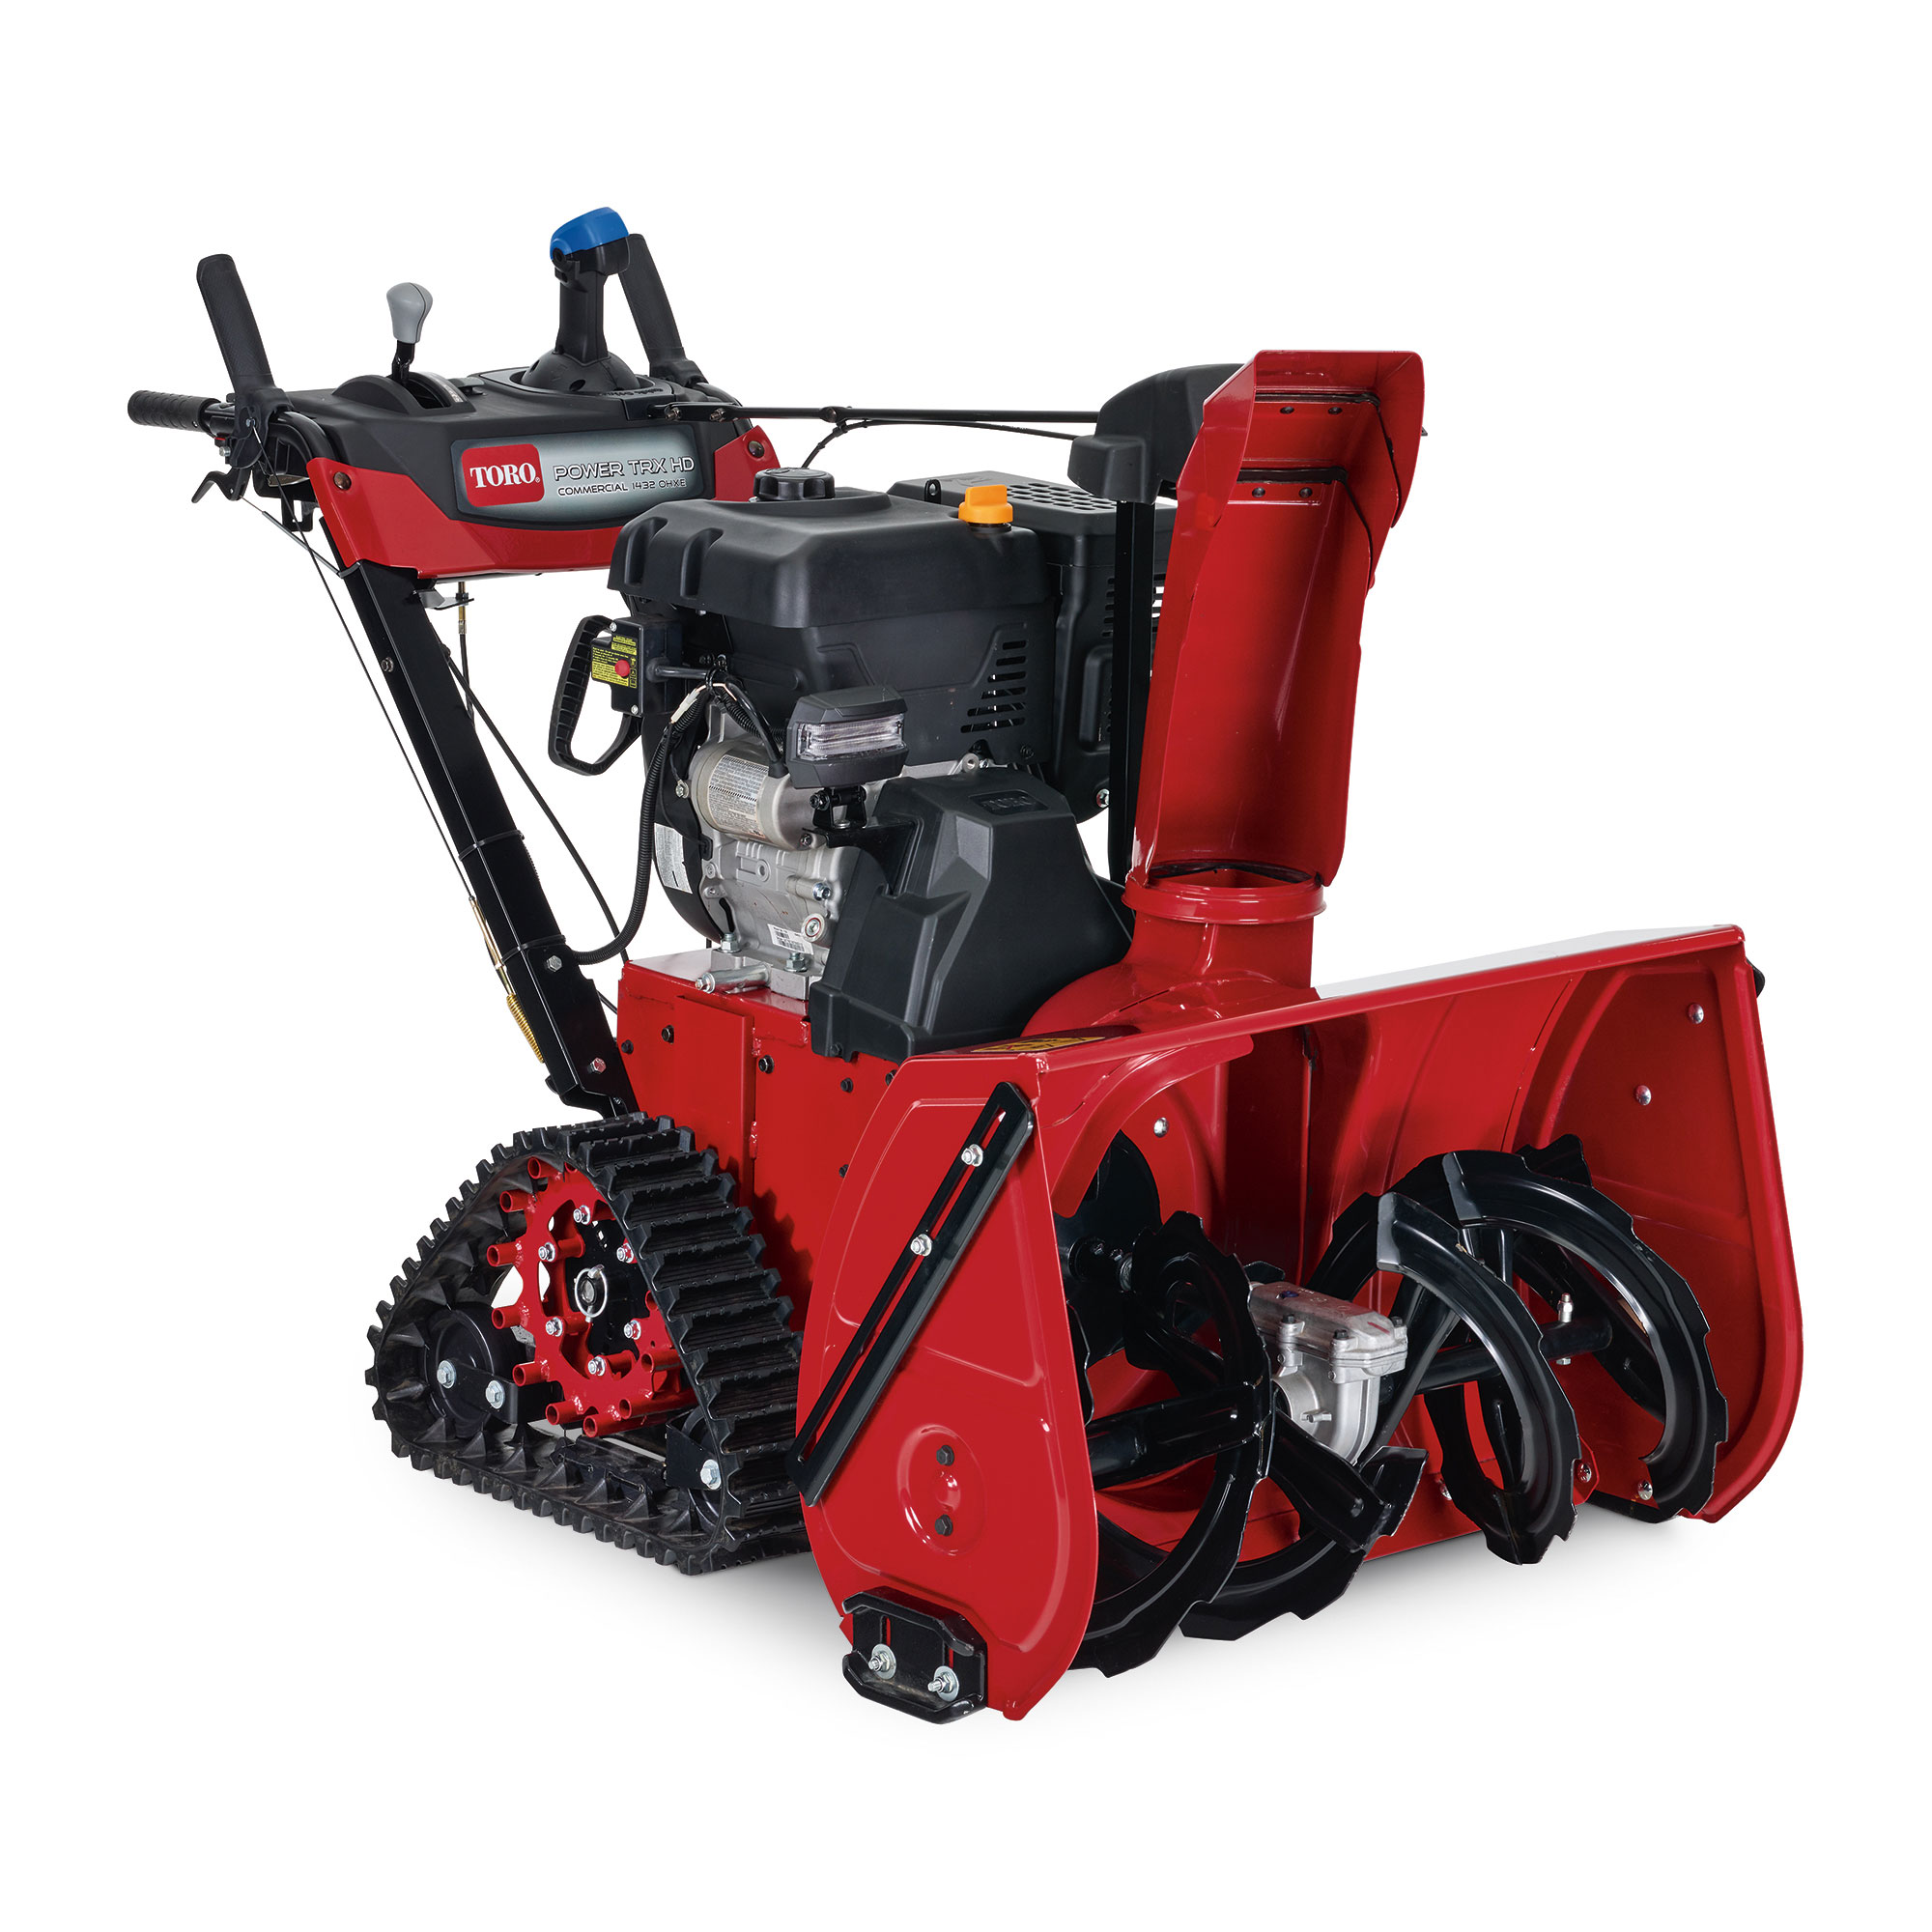 Snow Blowers, Electric or Gas, Toro